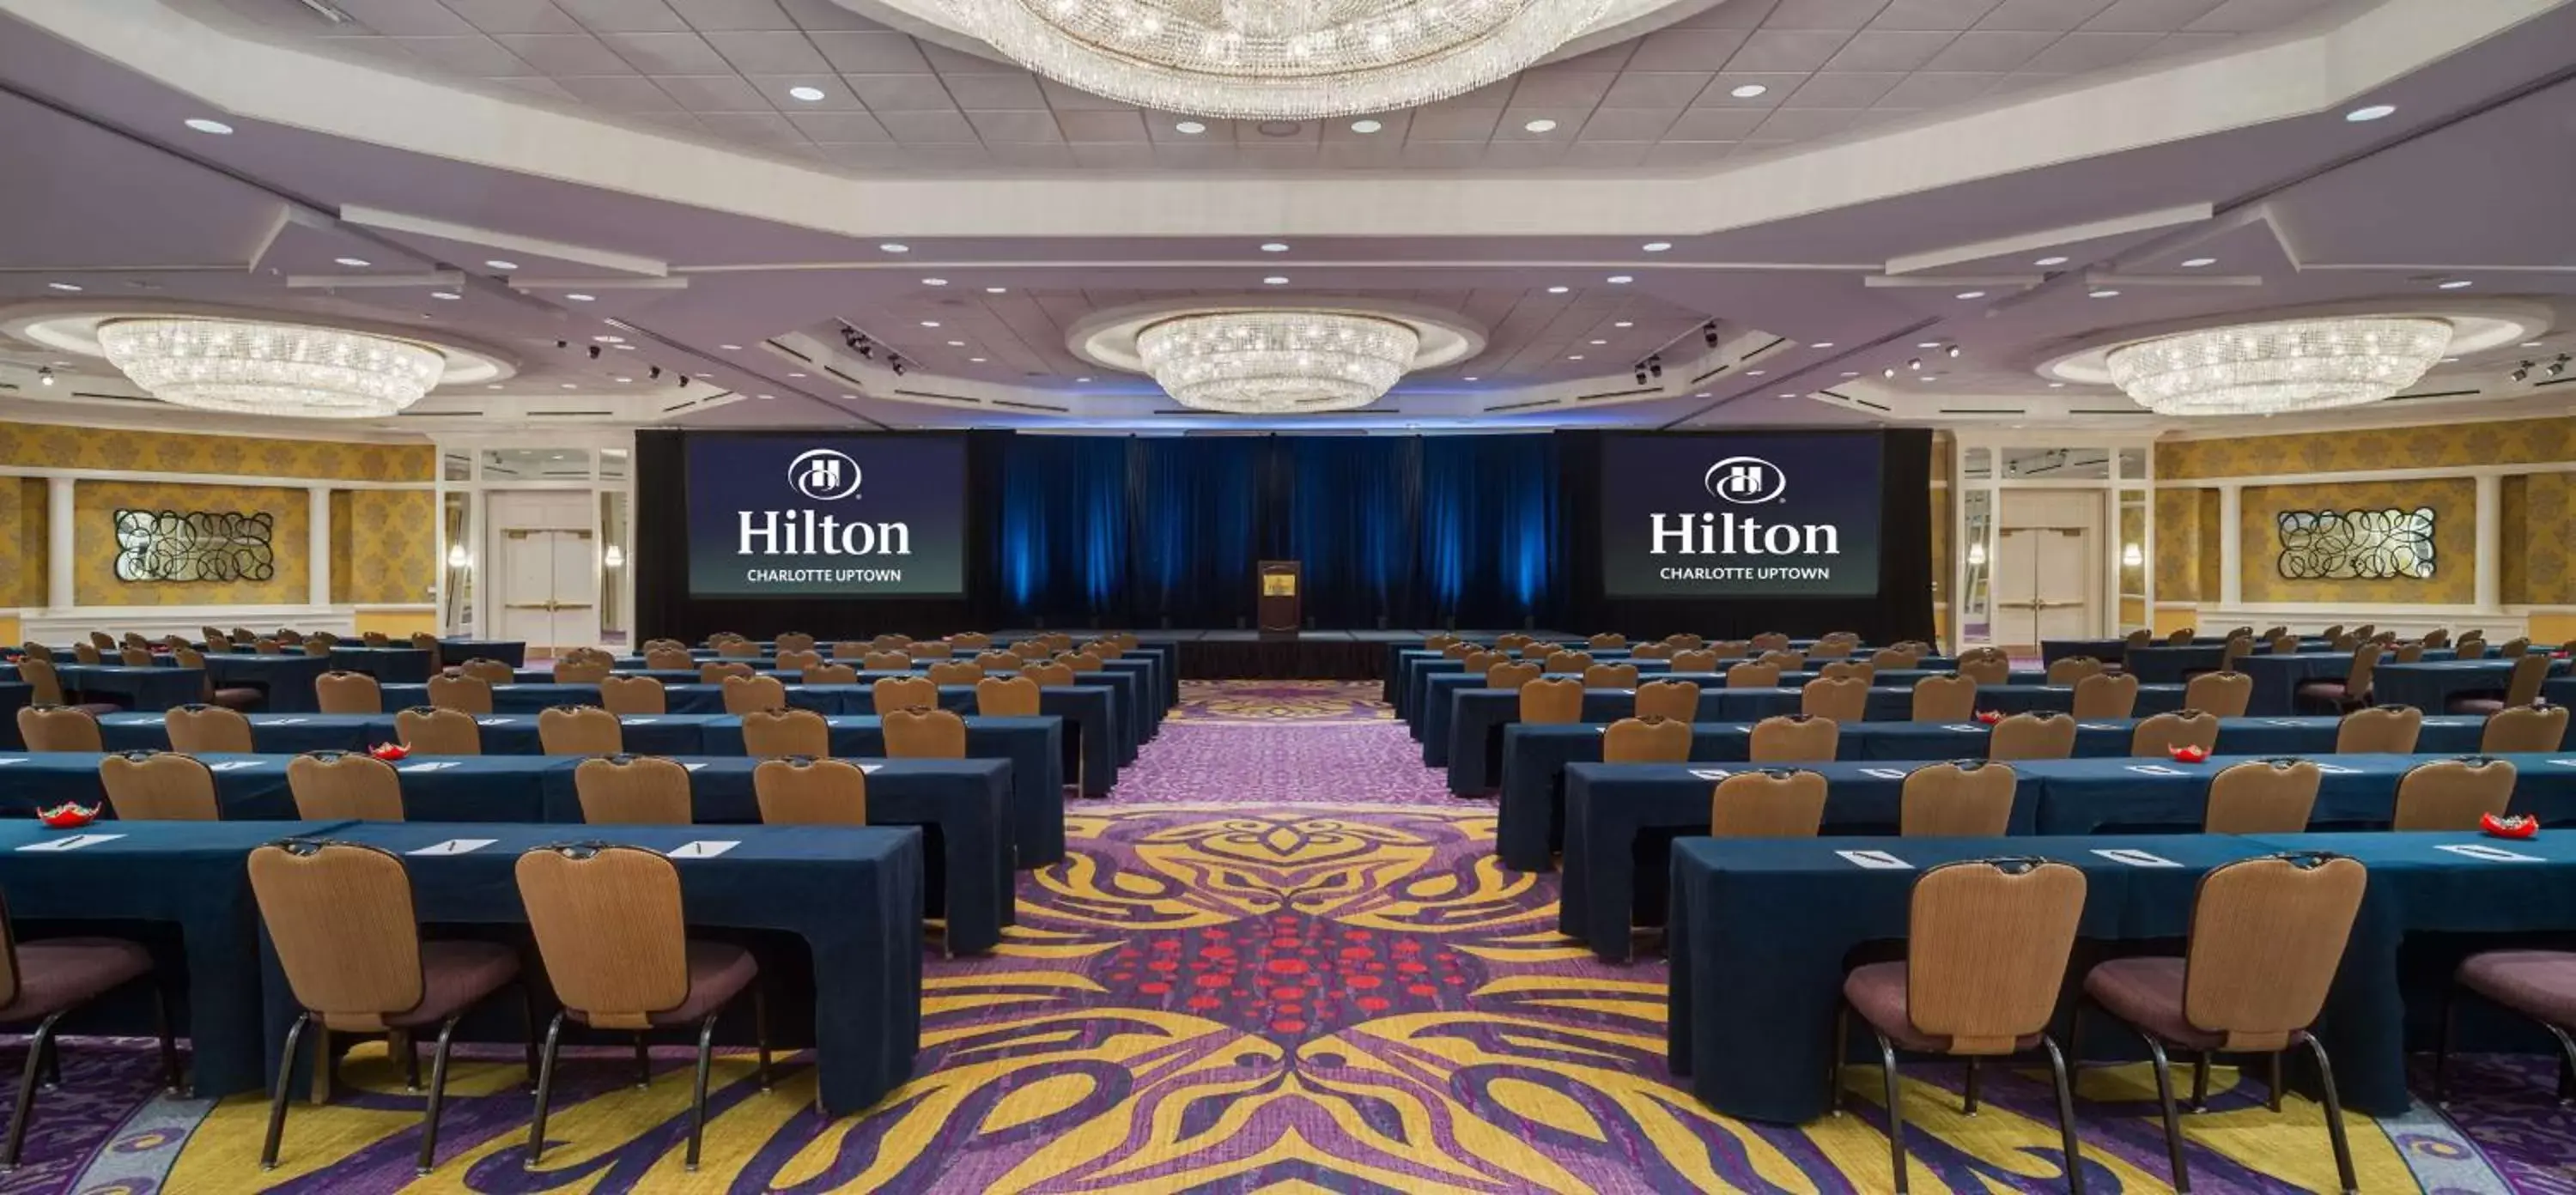 Meeting/conference room in Hilton Charlotte Uptown